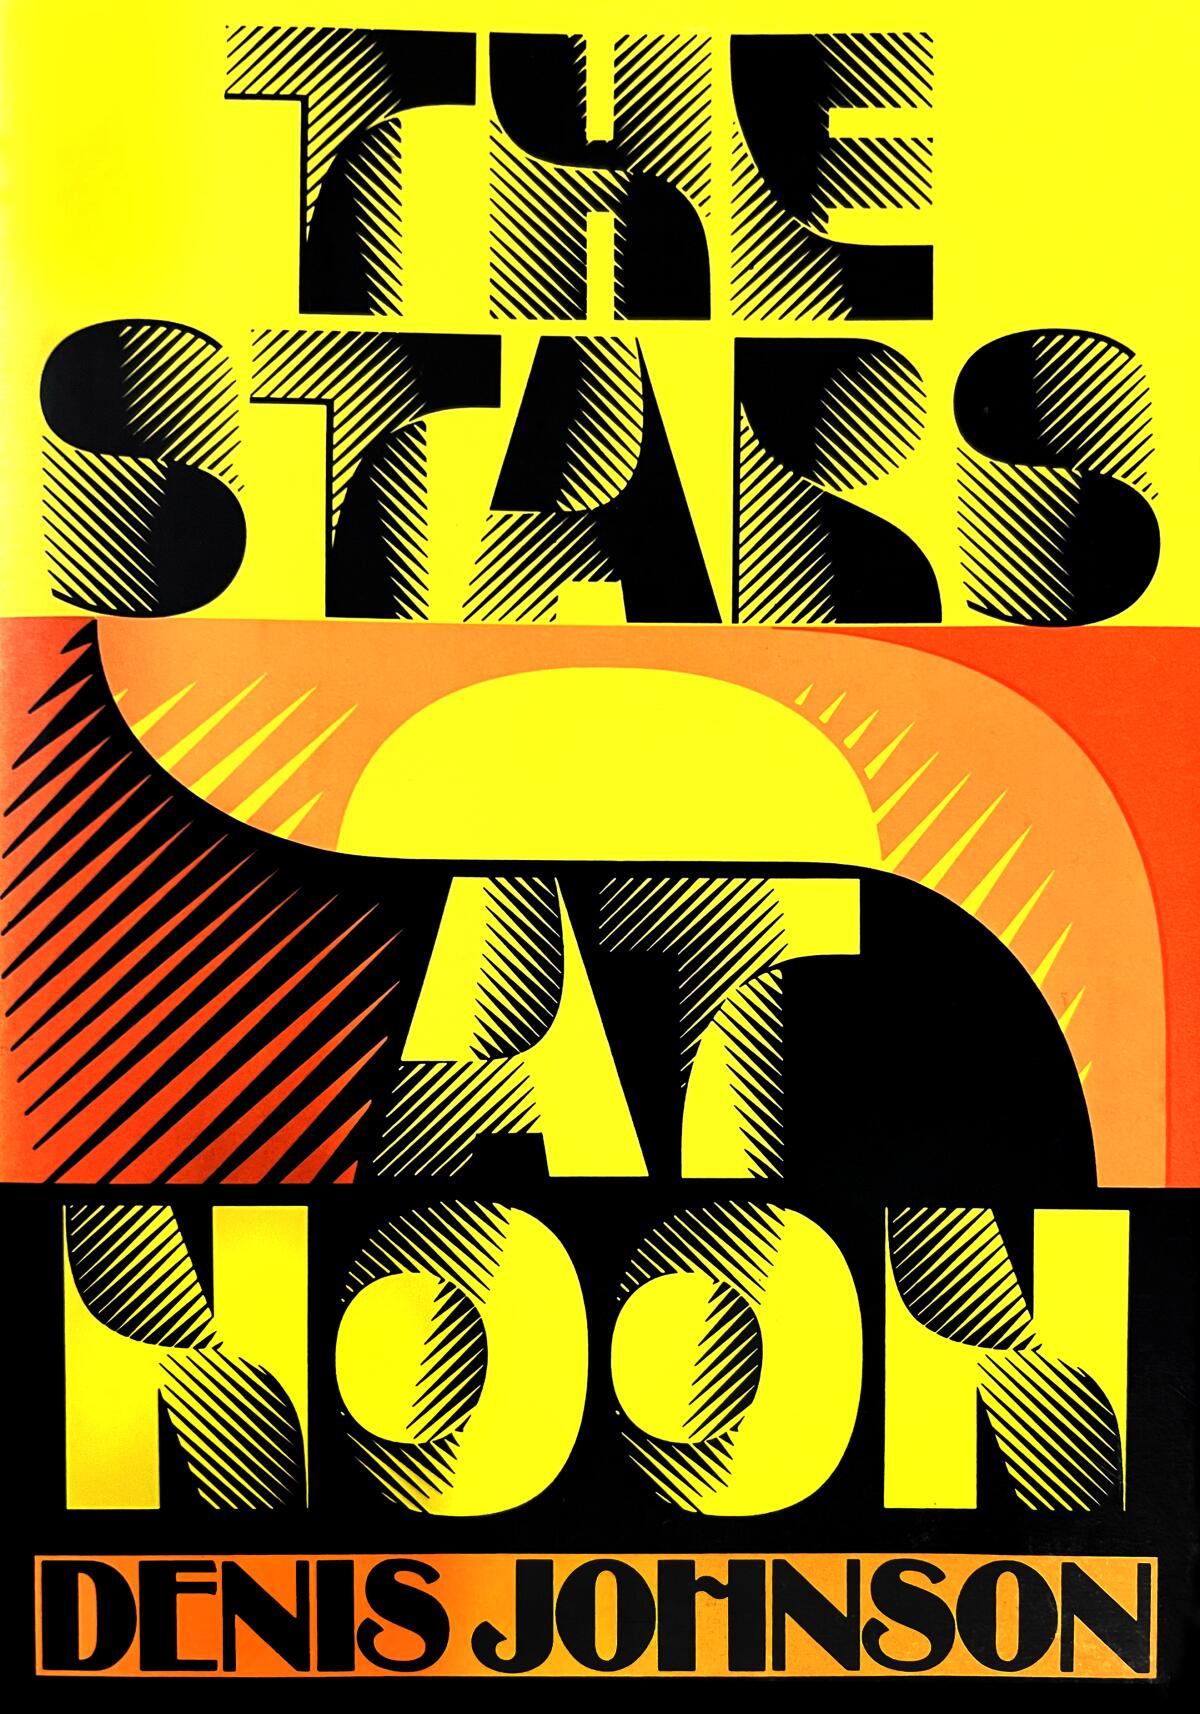 The jacket cover of "The Stars at Noon" by Denis Johnson